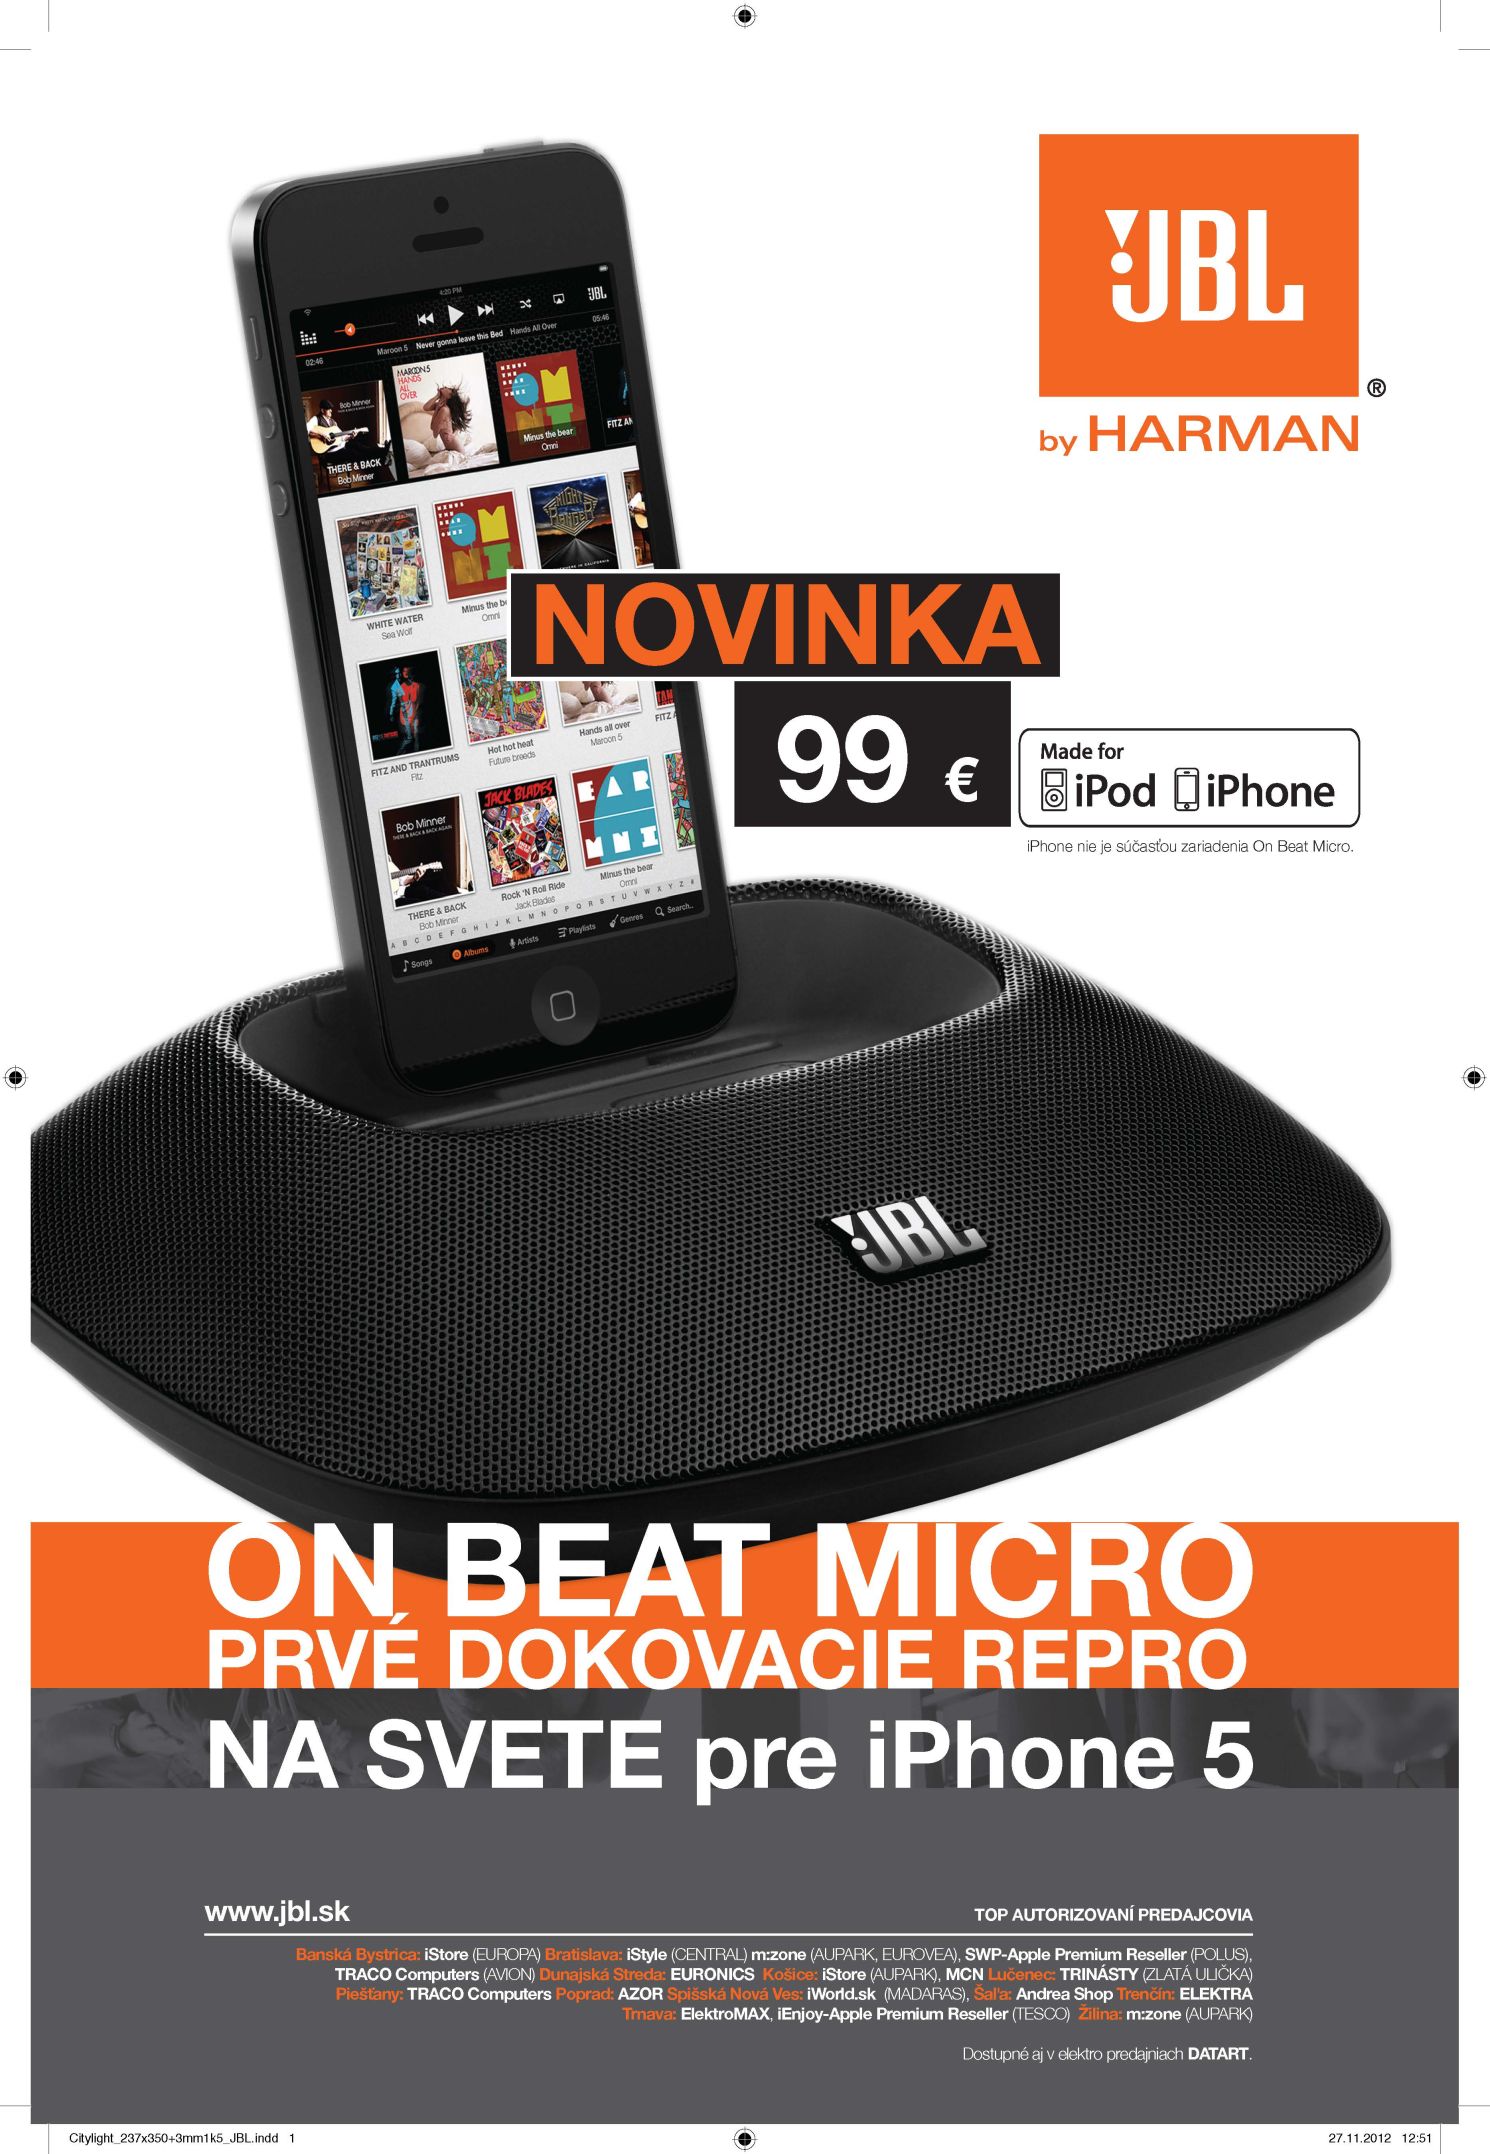 ON BEAT MICRO prvy dock pre iPhone 5/nove iPod Nano a Touch